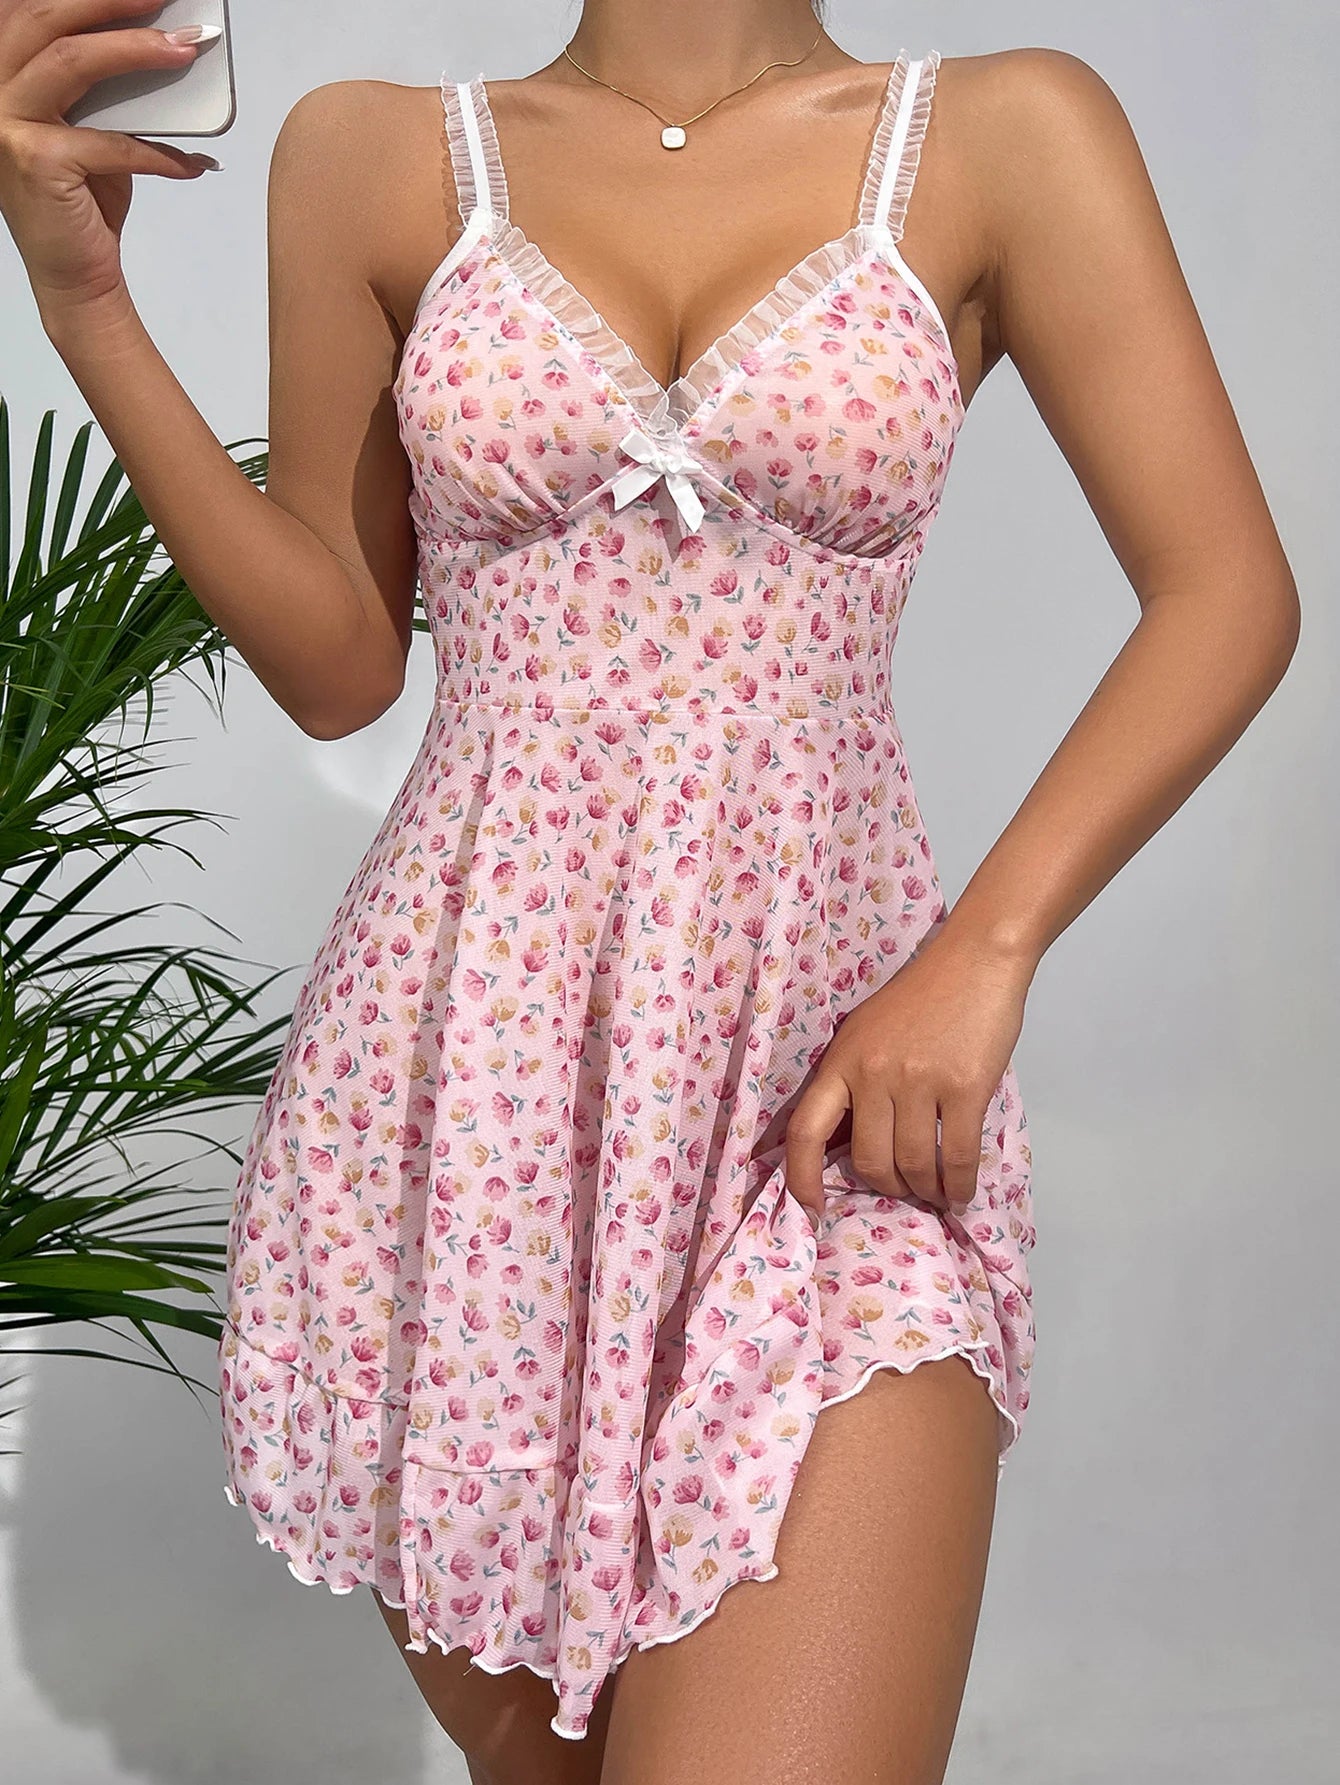 Summer Pink Dress Floral Printed Lace for Women Home V-neck with Strap Camisole Nightdress